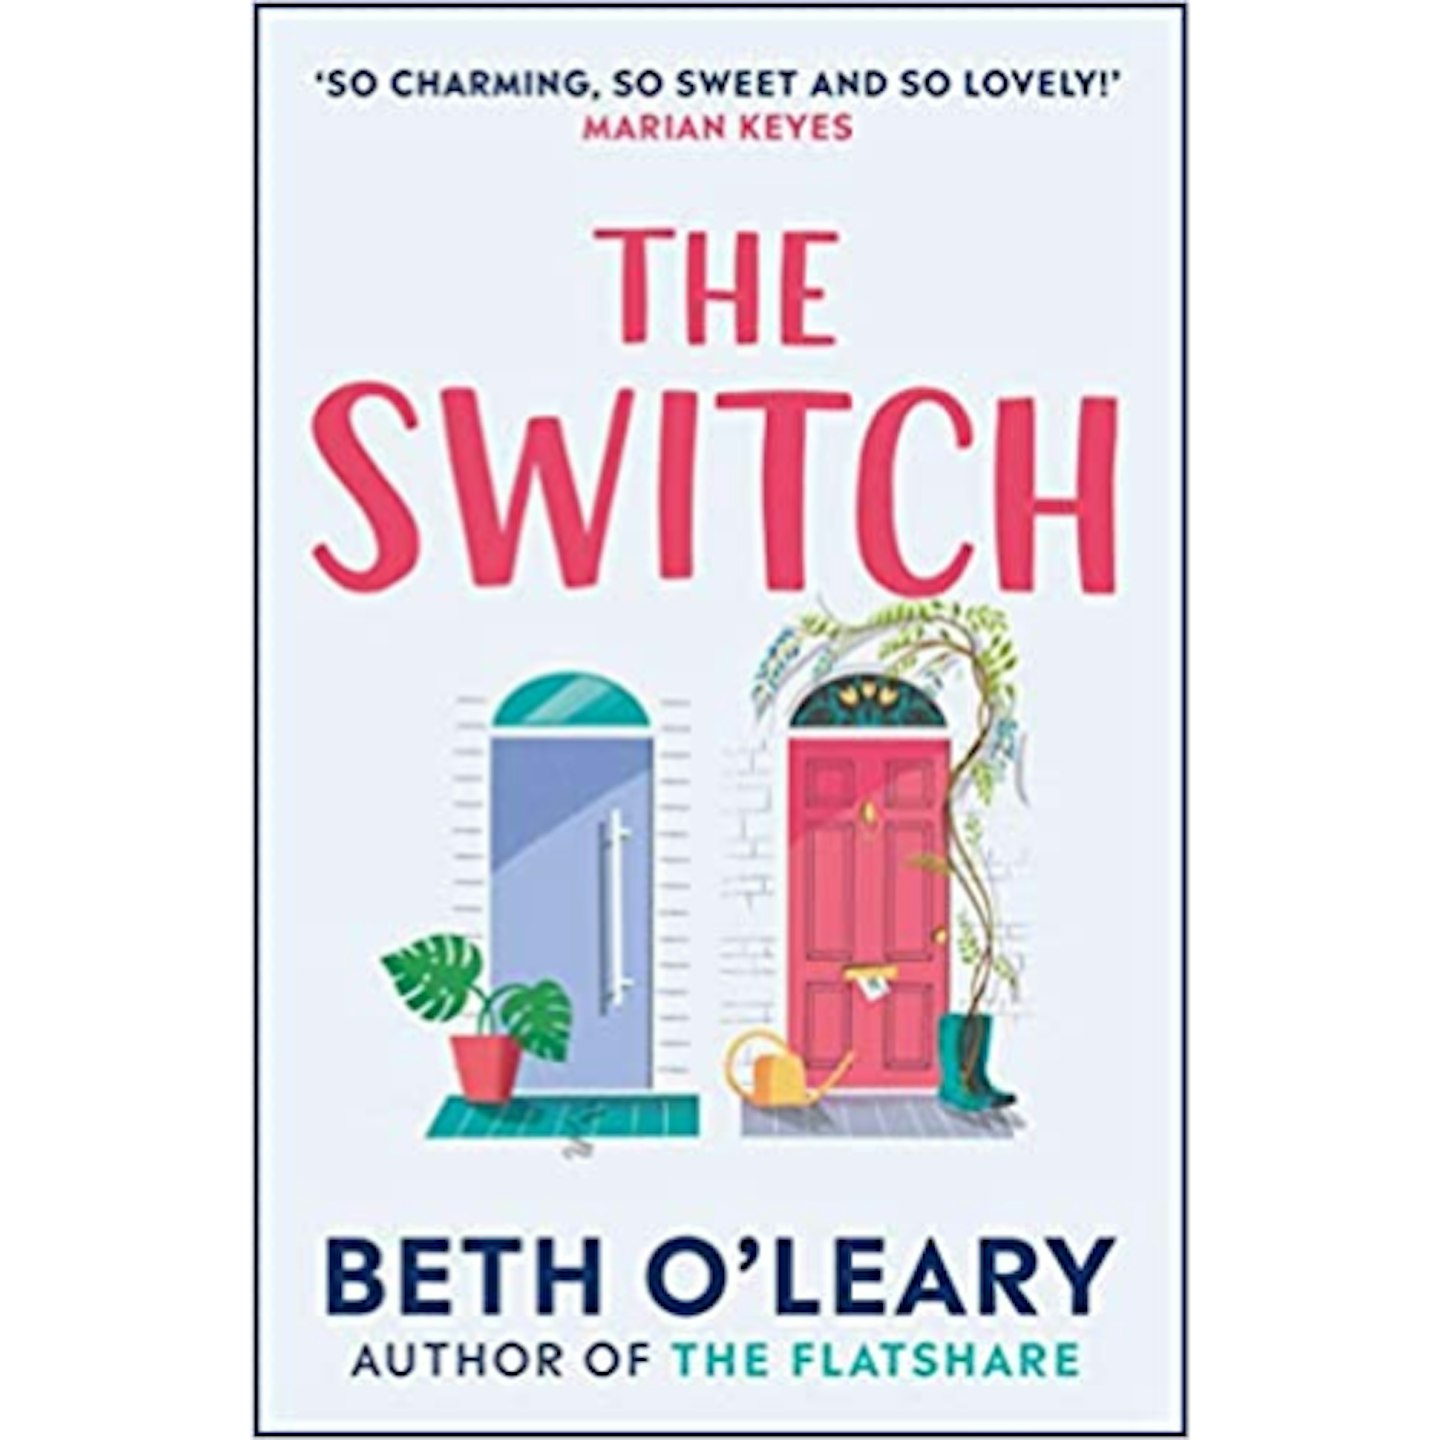 The Switch by Beth O'Leary